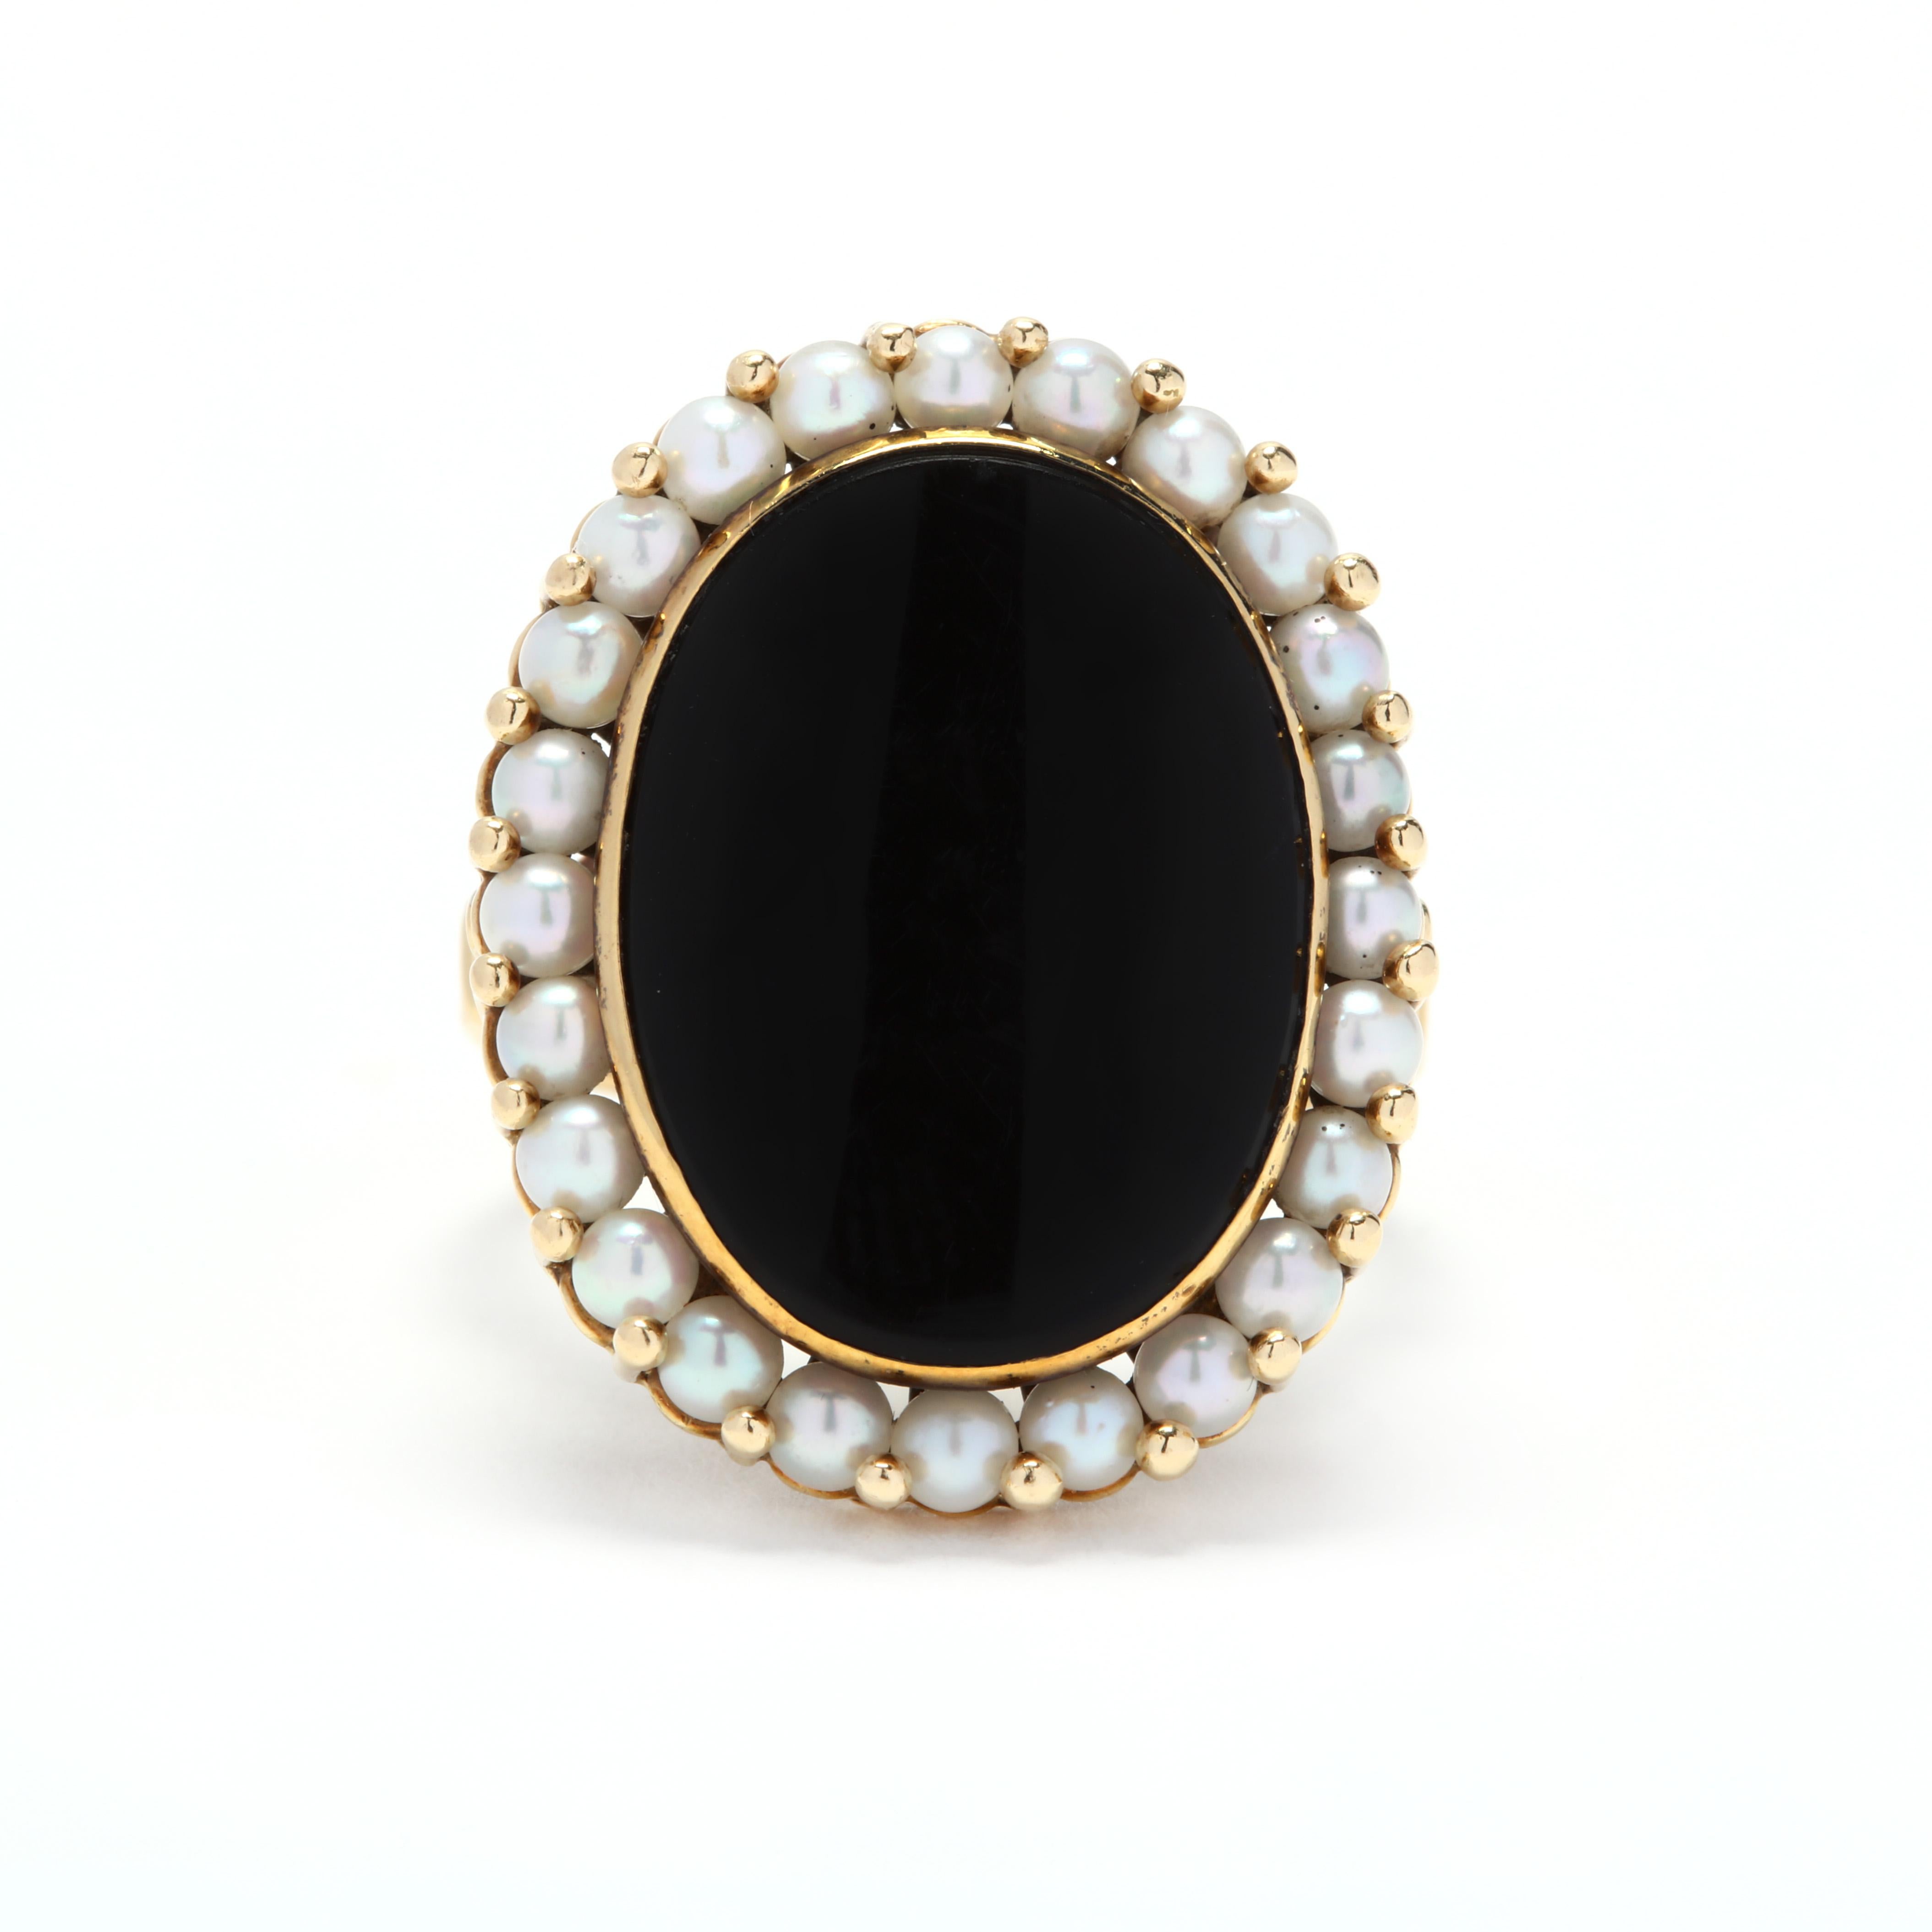 A vintage 18 karat yellow gold, black onyx and pearl ring. This ring features a bezel set oval, flat cut black onyx center stone surrounded by a halo of pearls.

Stones:
- black onyx, 1 stone
- oval flat cut
- 20 x 15 mm

- pearls, 24 stones
-